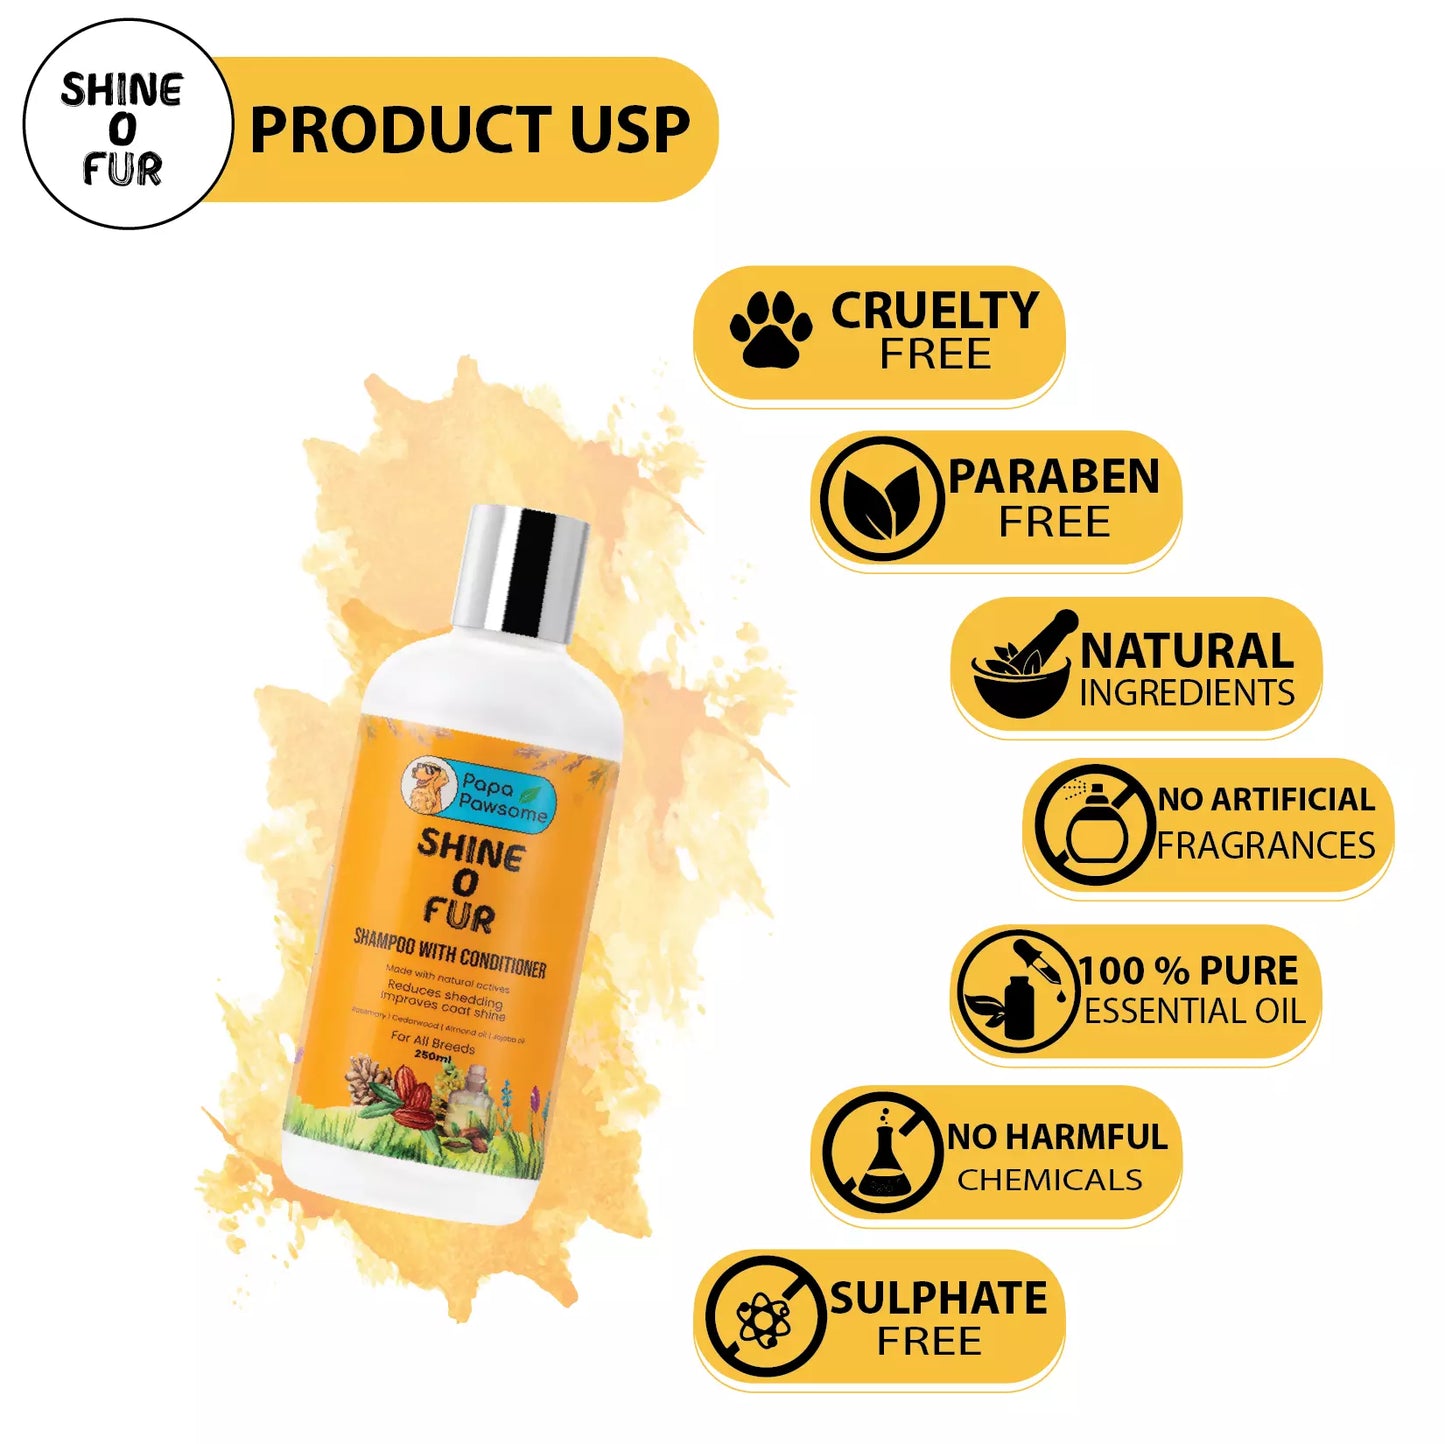 Product features: Cruelty-free, paraben-free, made with natural ingredients, no artificial fragrances, 100% pure essential oils, no harmful chemicals.